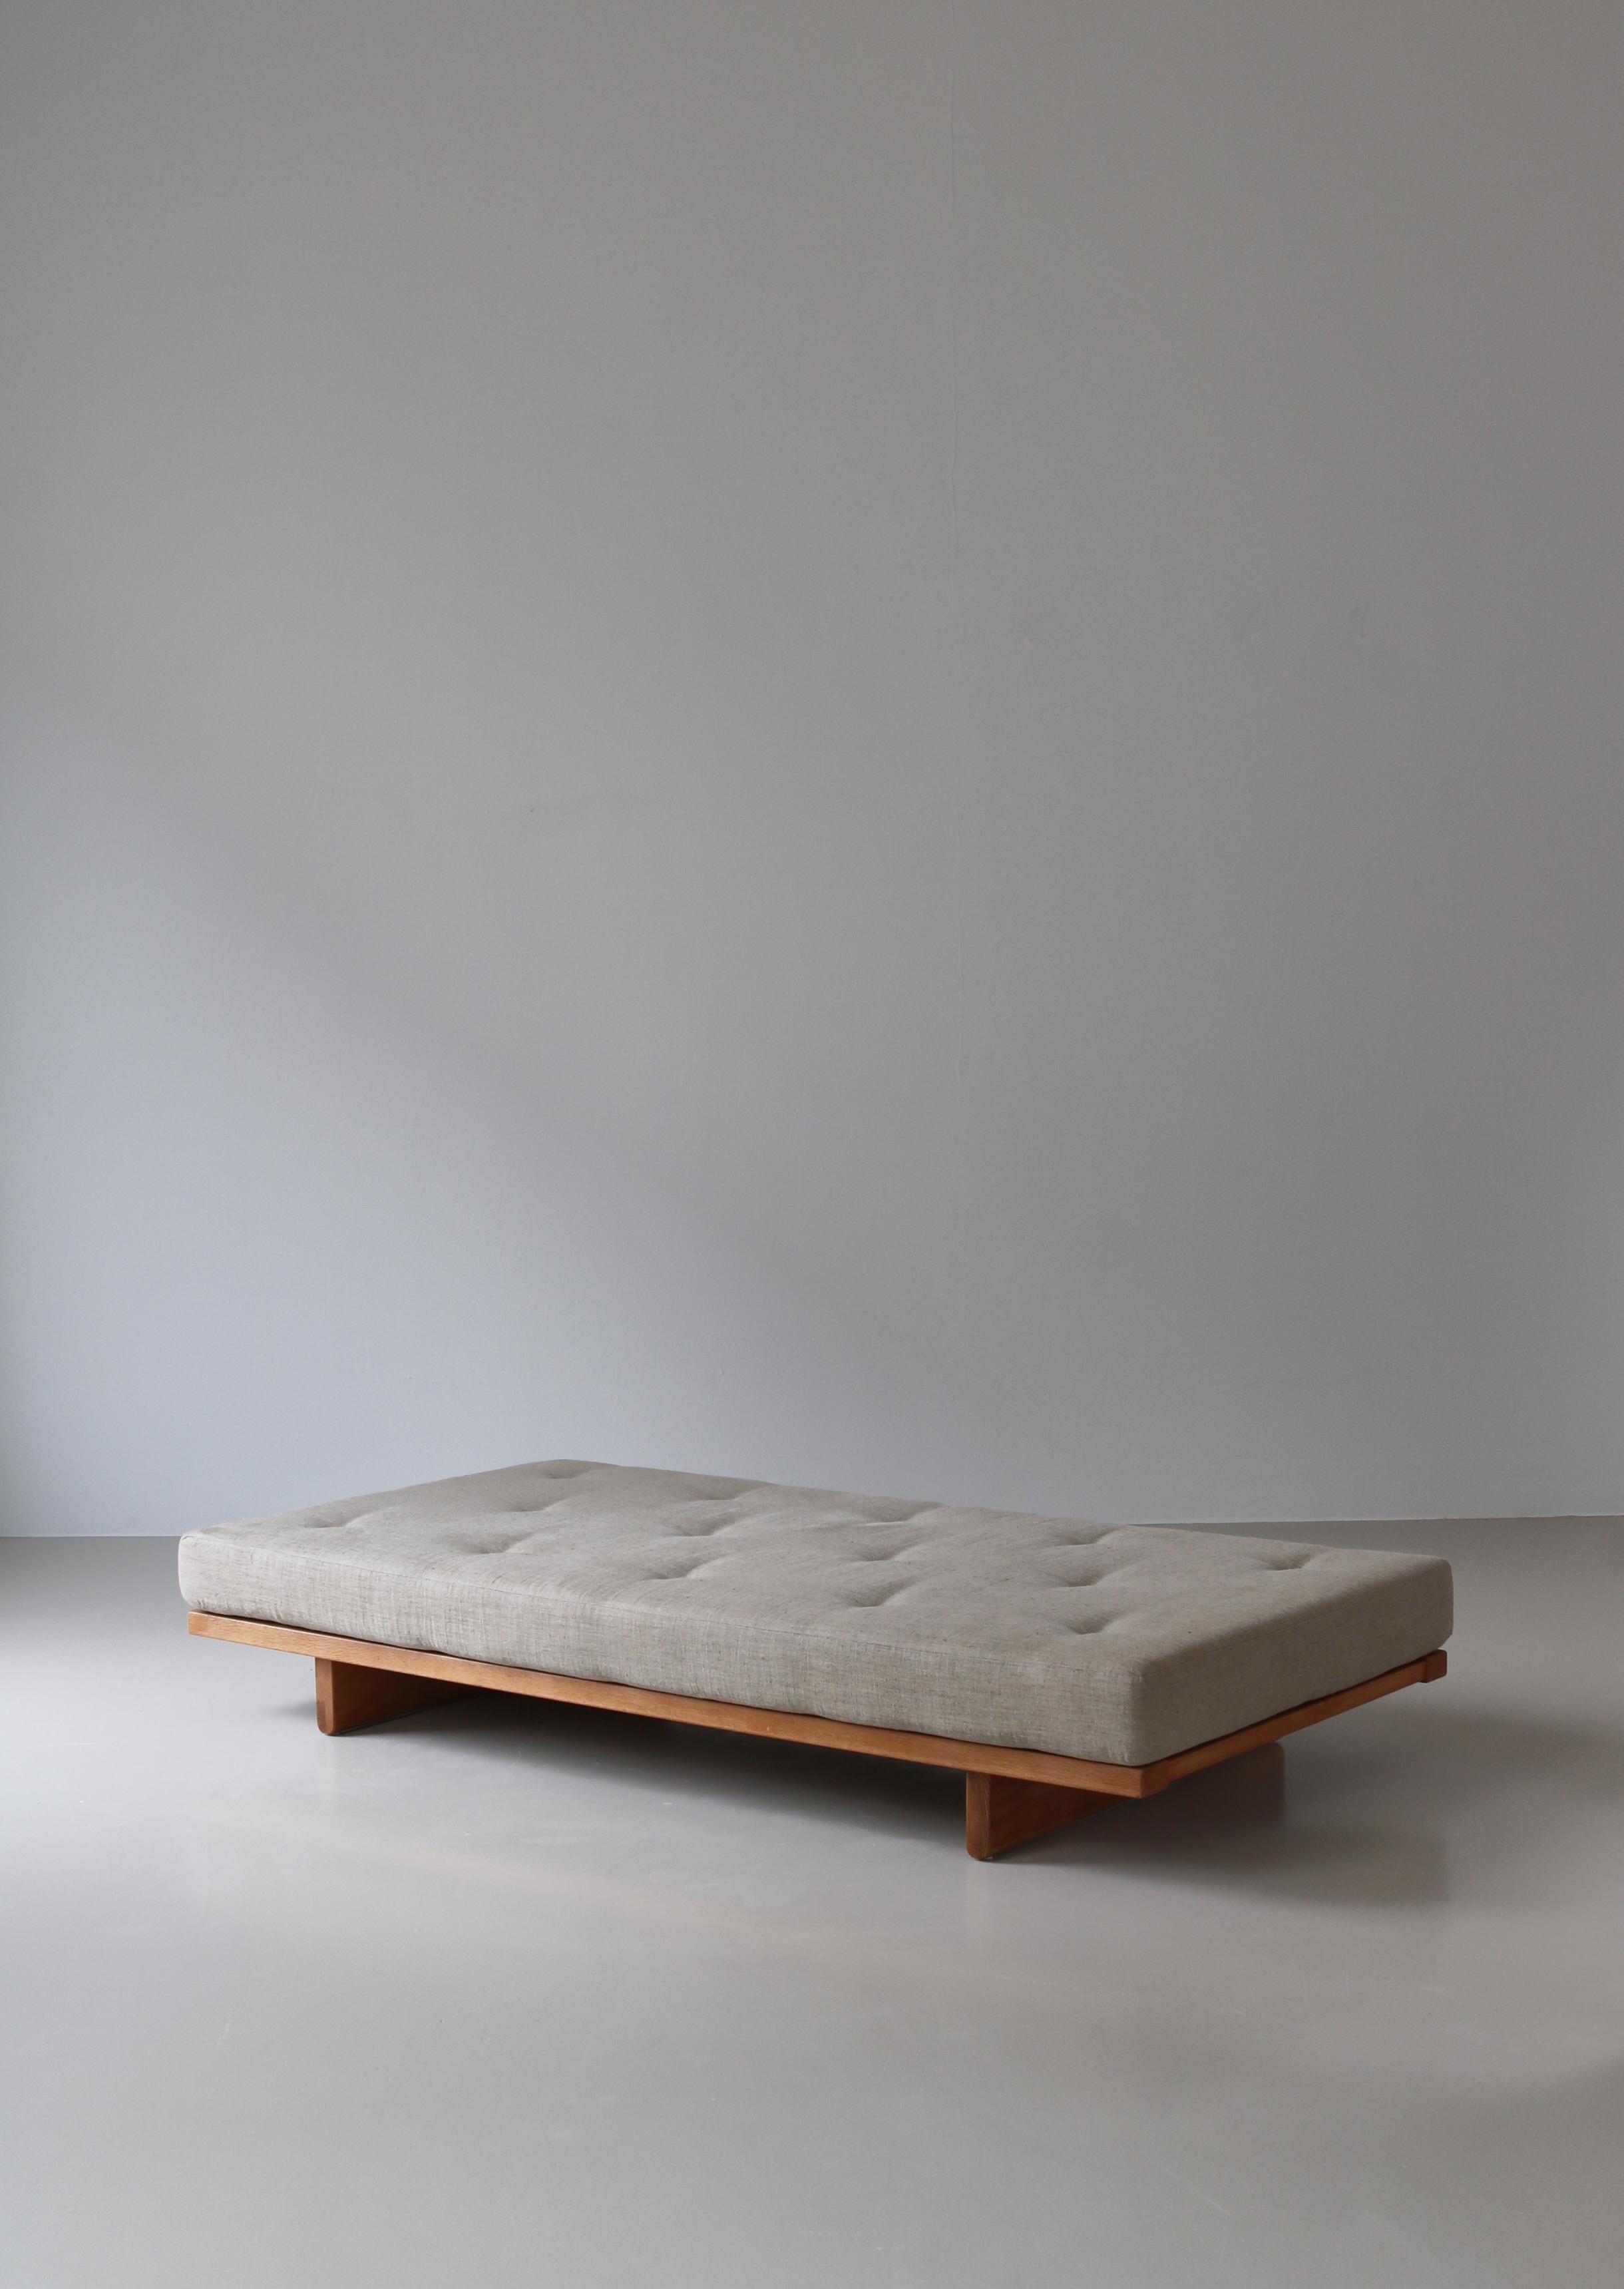 Danish Modern Børge Mogensen Daybed Model 4312 in Oak & Canvas Upholstery, 1960s In Good Condition For Sale In Odense, DK